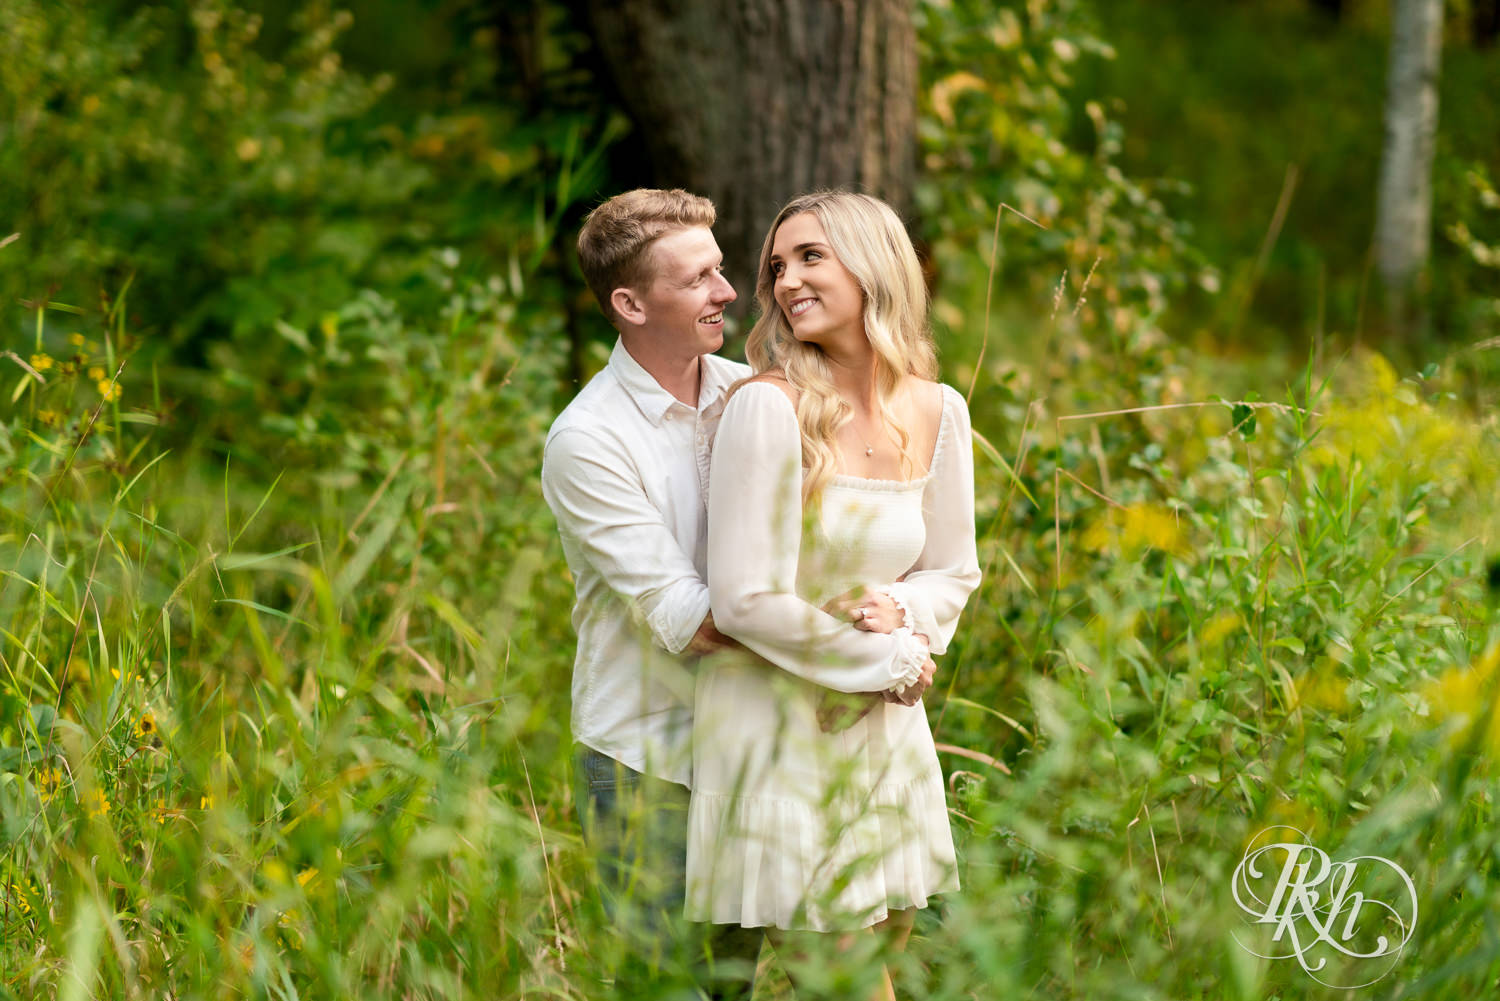 Man and woman in white and cowboy boots smile during engagement photography at Lebanon Hills Regional Park in Eagan, Minnesota.